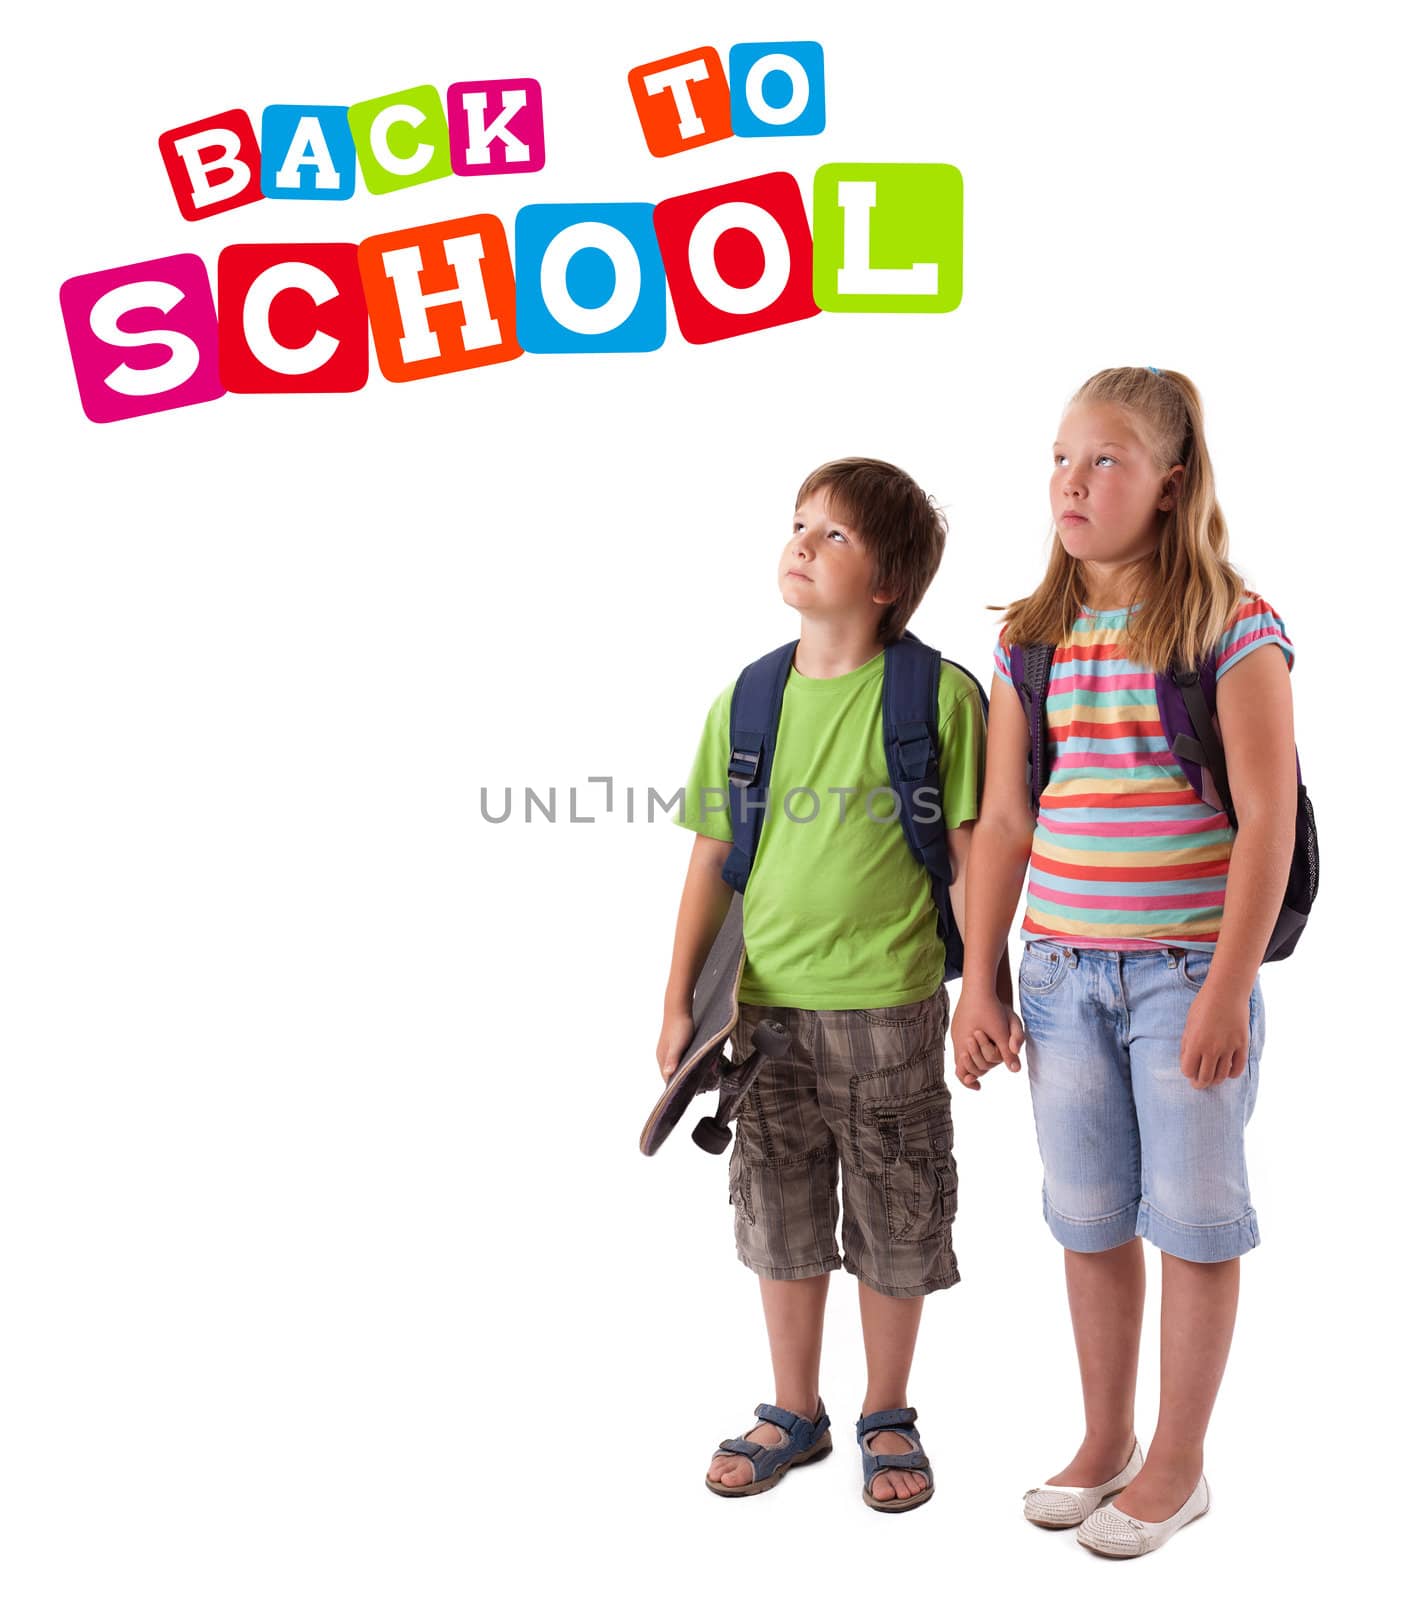 Kids with back to school theme isolated on white by ra2studio